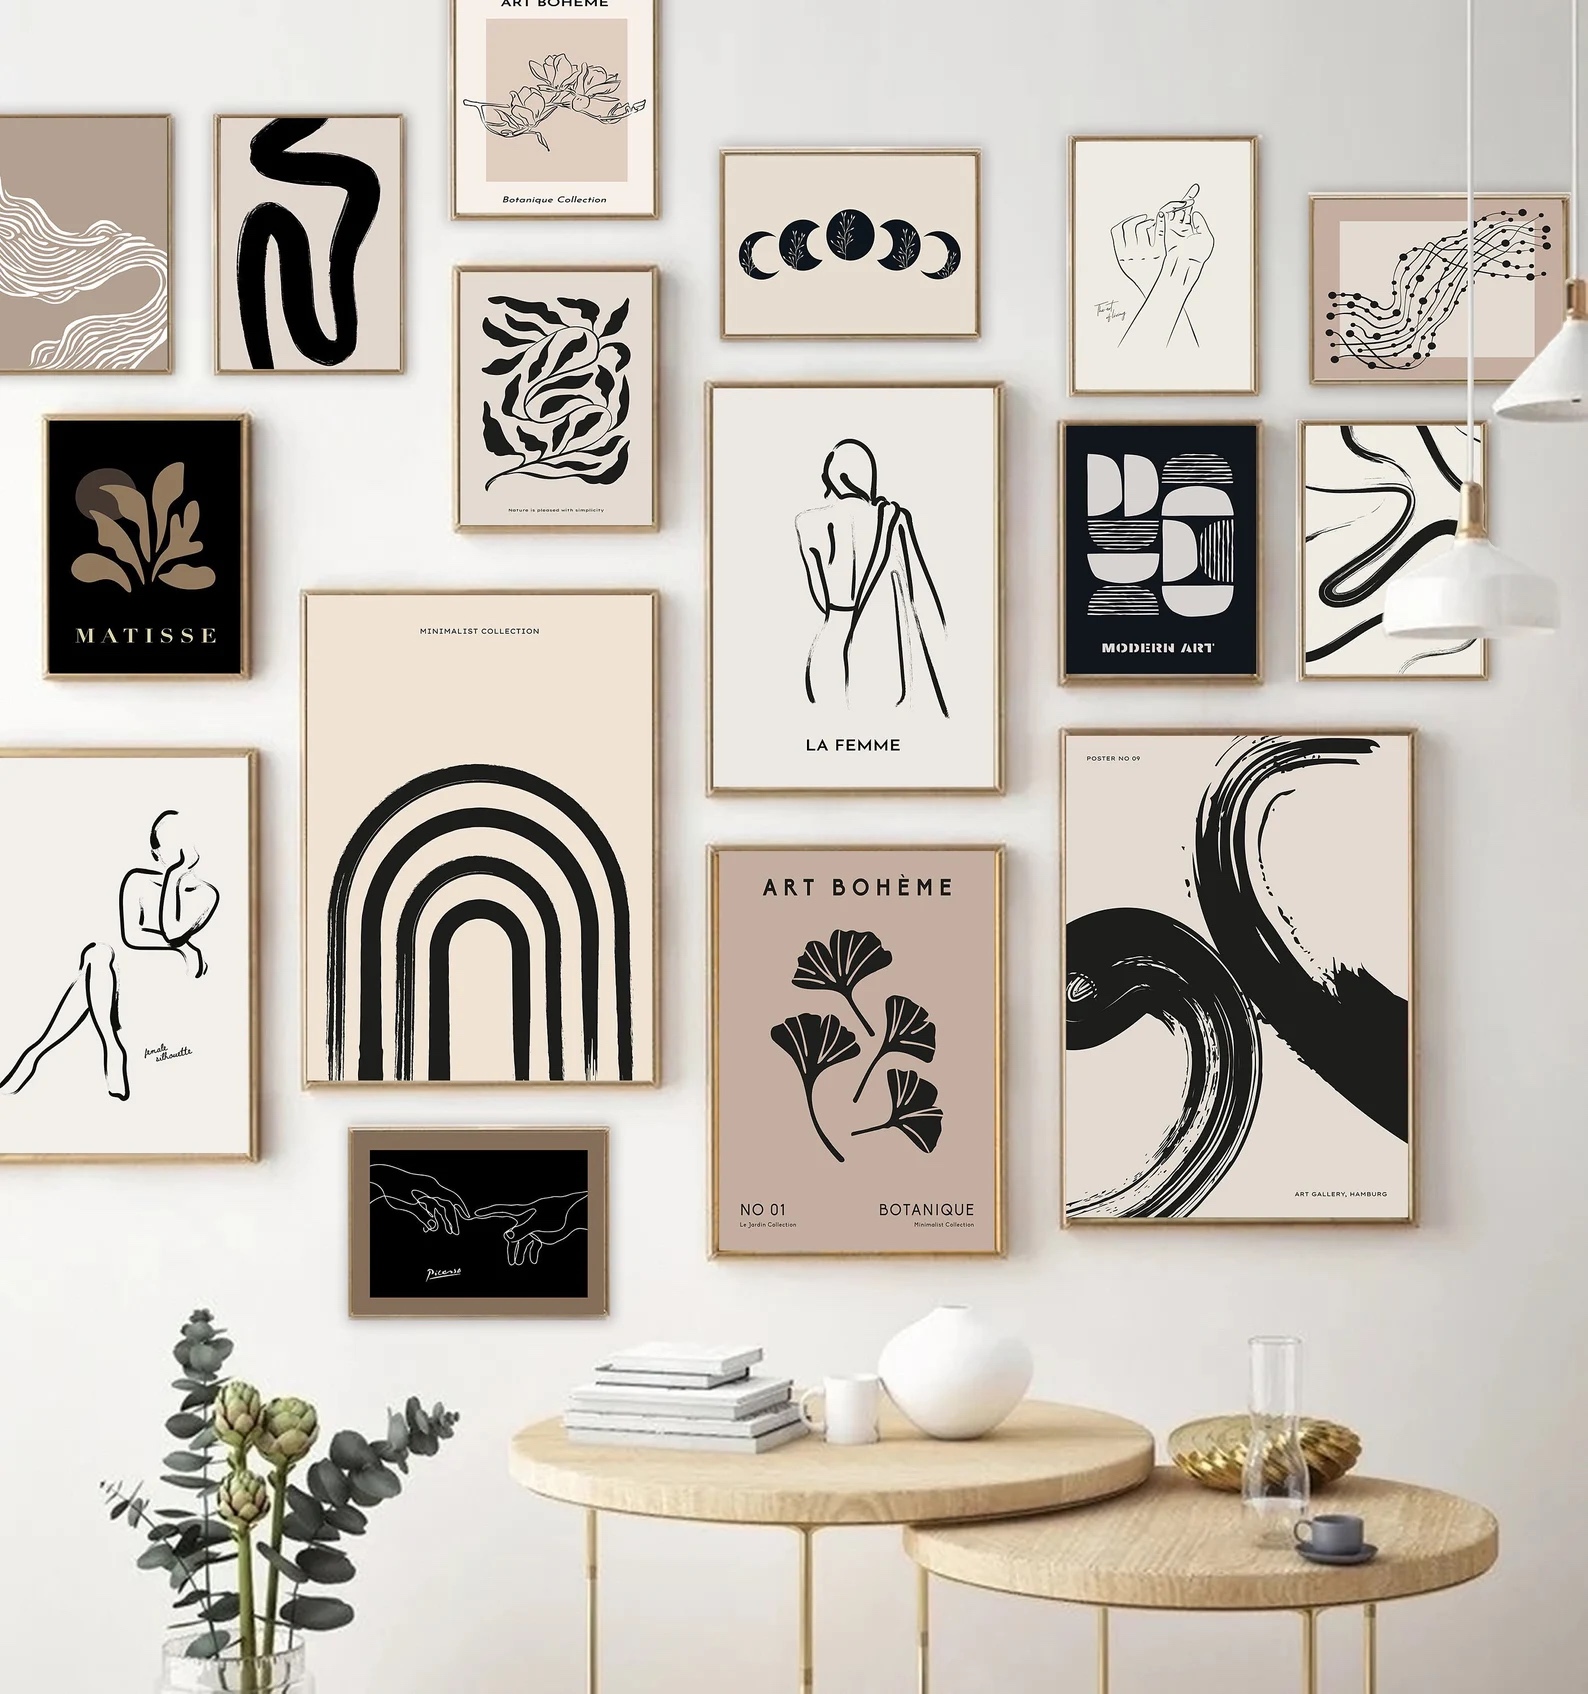 Etsy wall decor ideas gallery wall with black and white images in light wooden frams